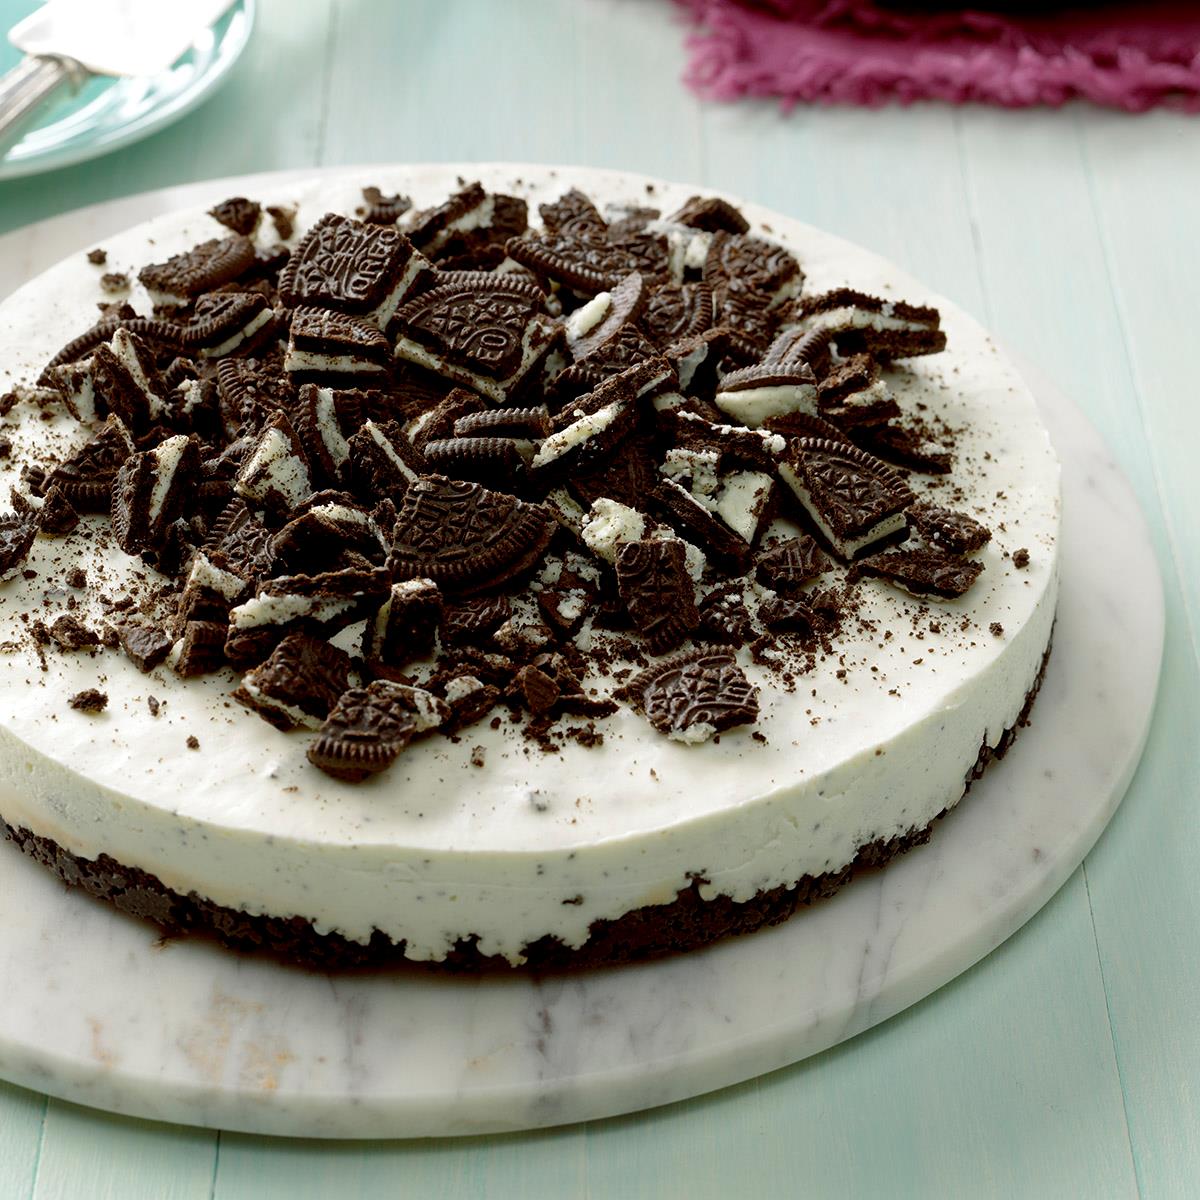 What Cake Matches Your Vibe? Oreo Cheesecake